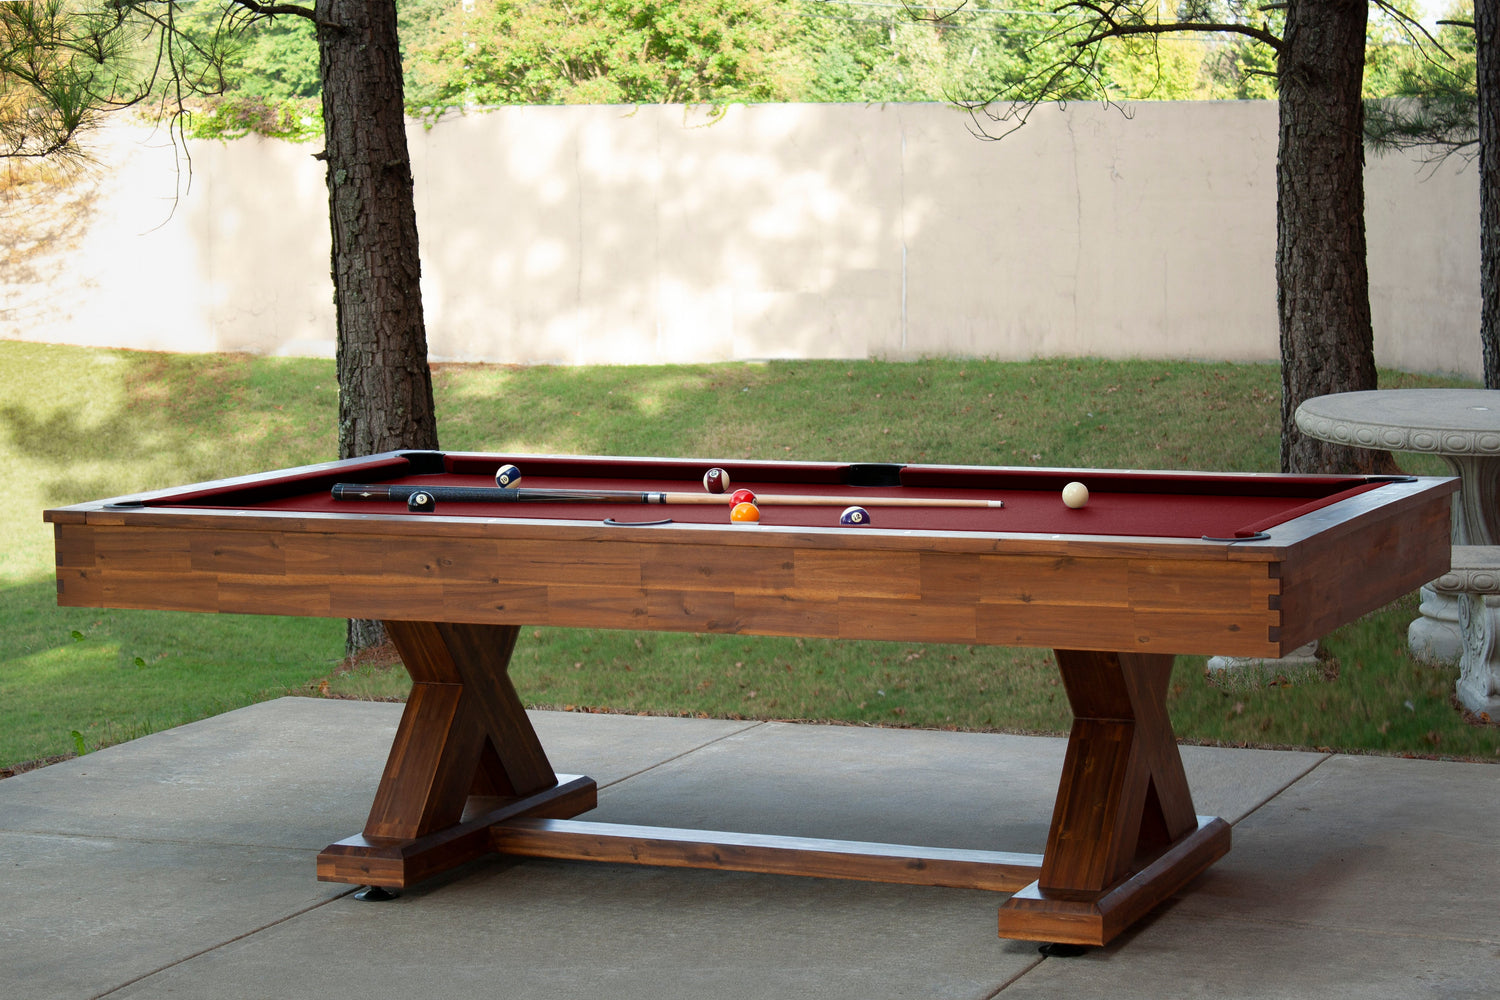 Legacy Billiards 8 Ft Cumberland Outdoor Pool Table in Natural Acacia Finish Outdoor Setting with Pool Balls and Cues on the Table